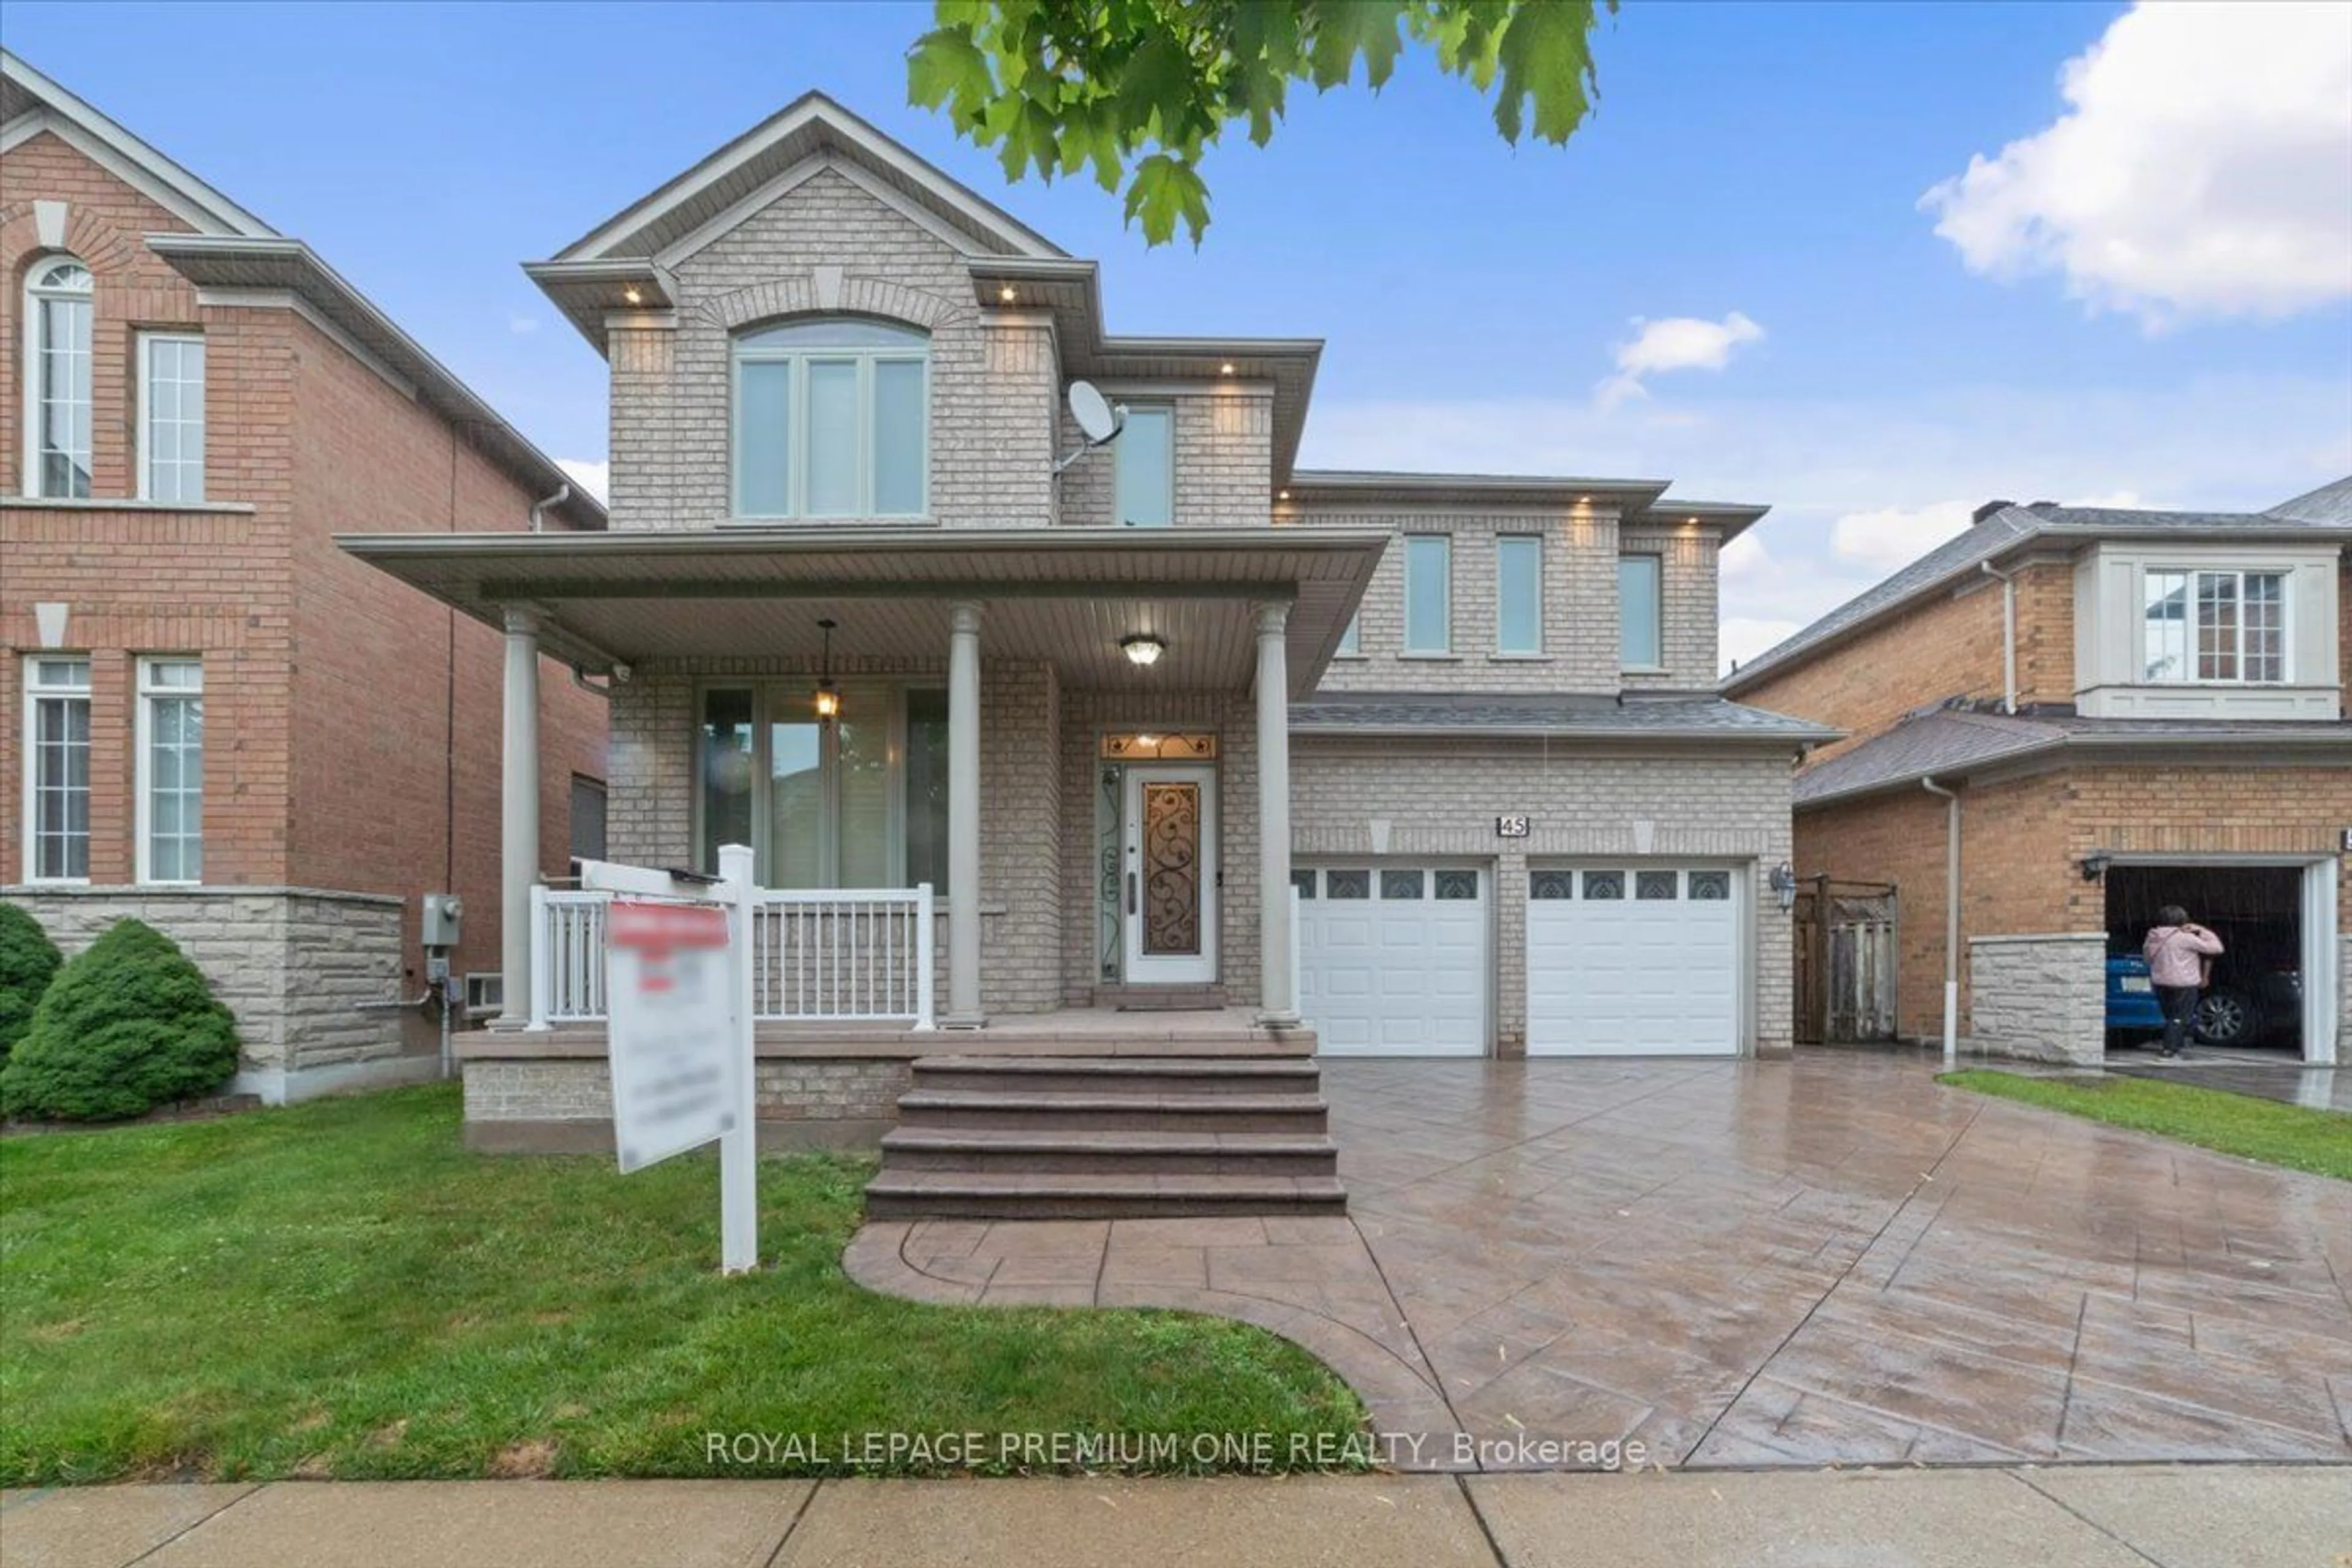 Home with brick exterior material for 45 Forecastle Rd, Vaughan Ontario L4K 5J1